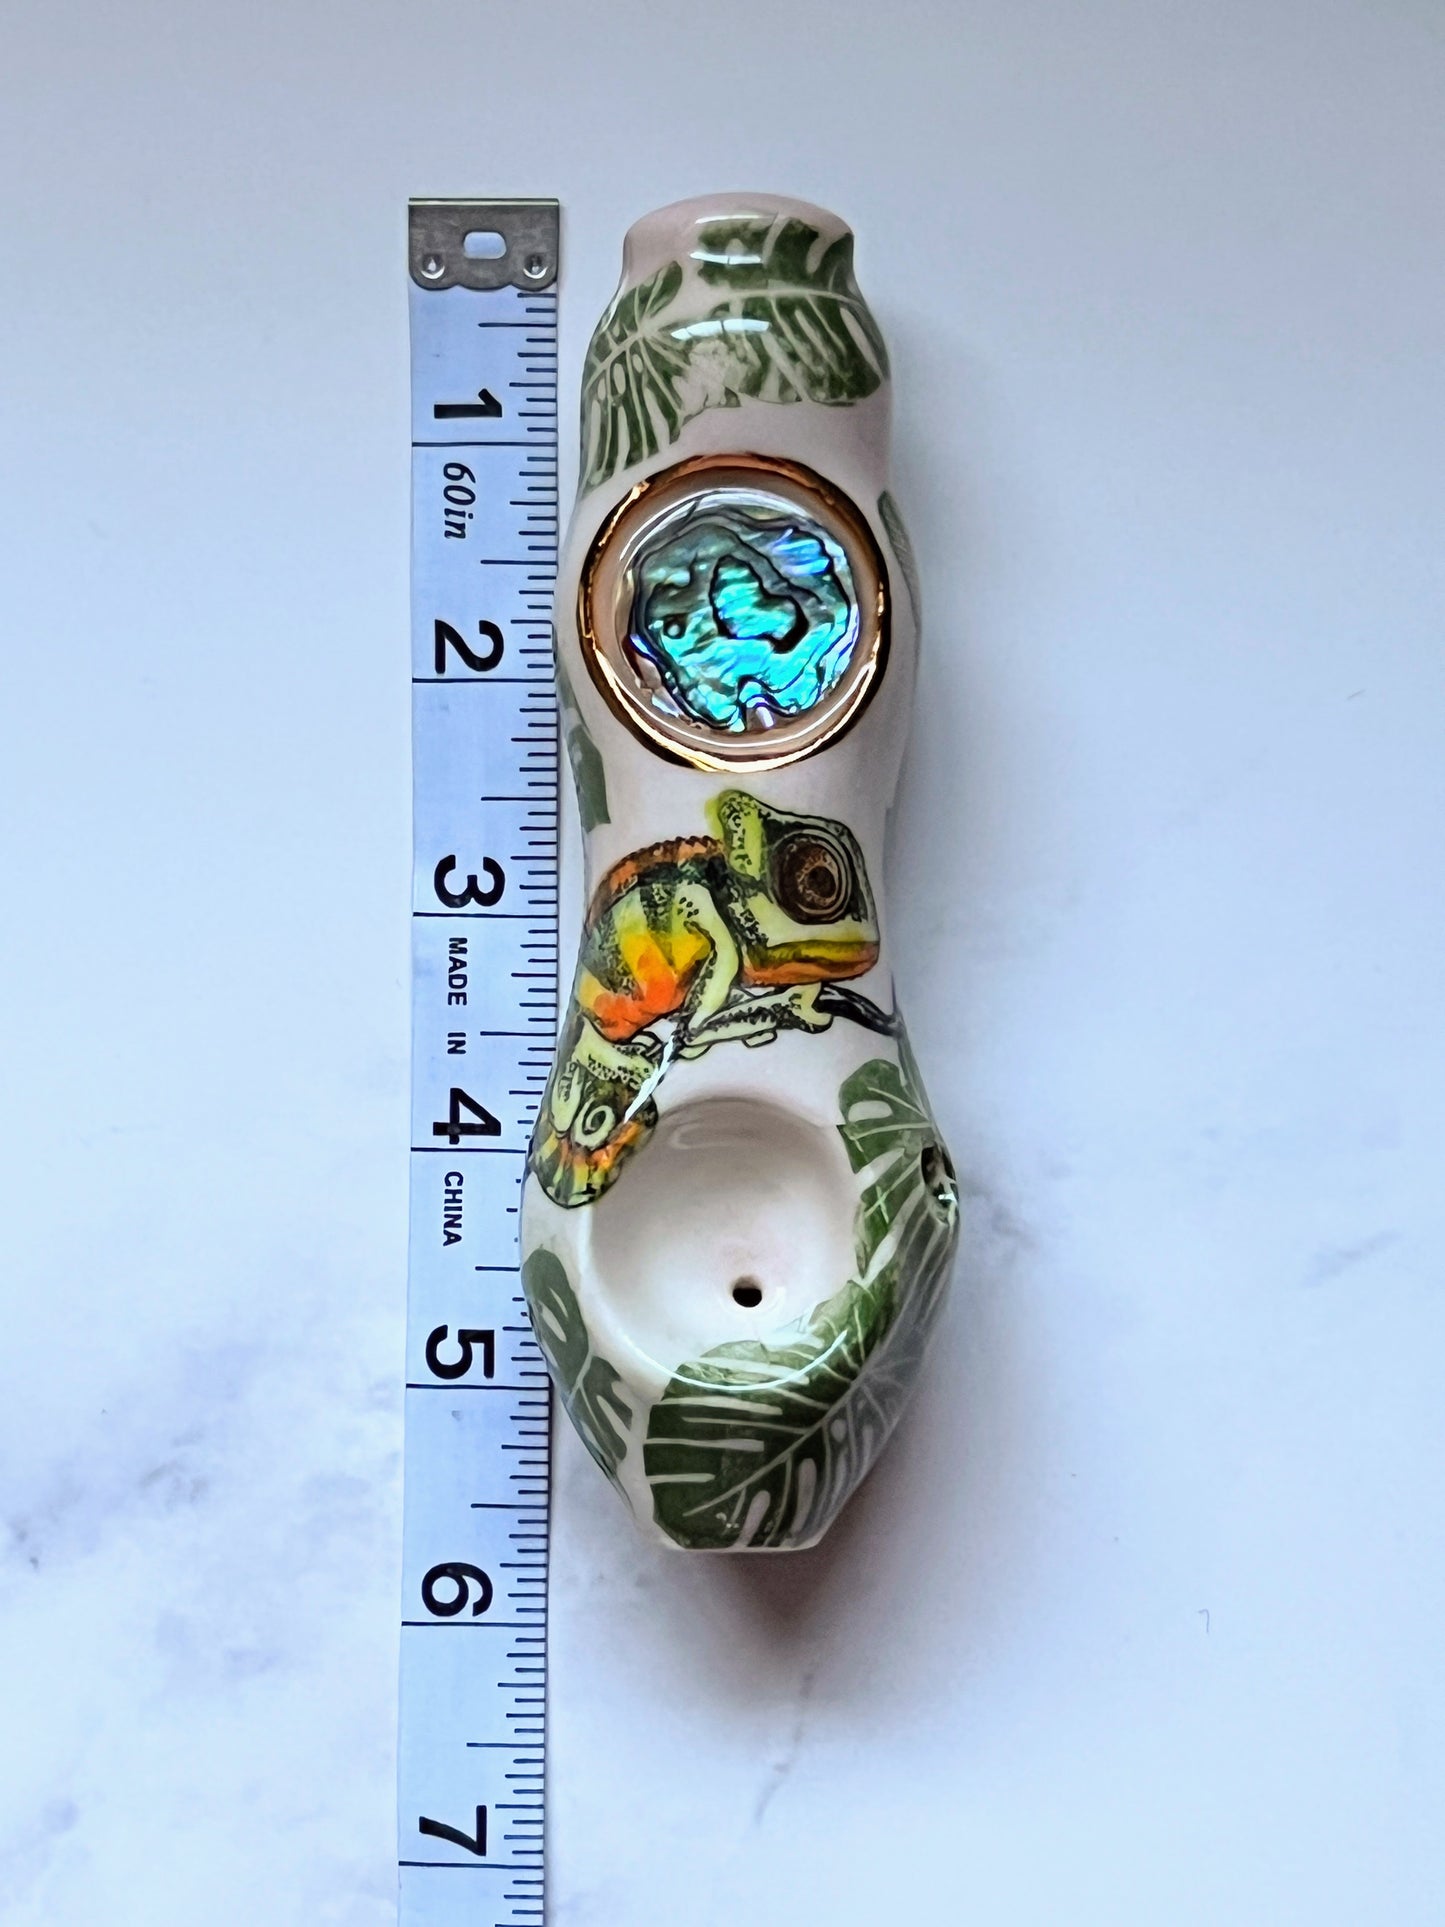 Abalone Pipe with Chameleon Jungle Leaves Ceramic Porcelain Smoking Pipe Clay Pipe